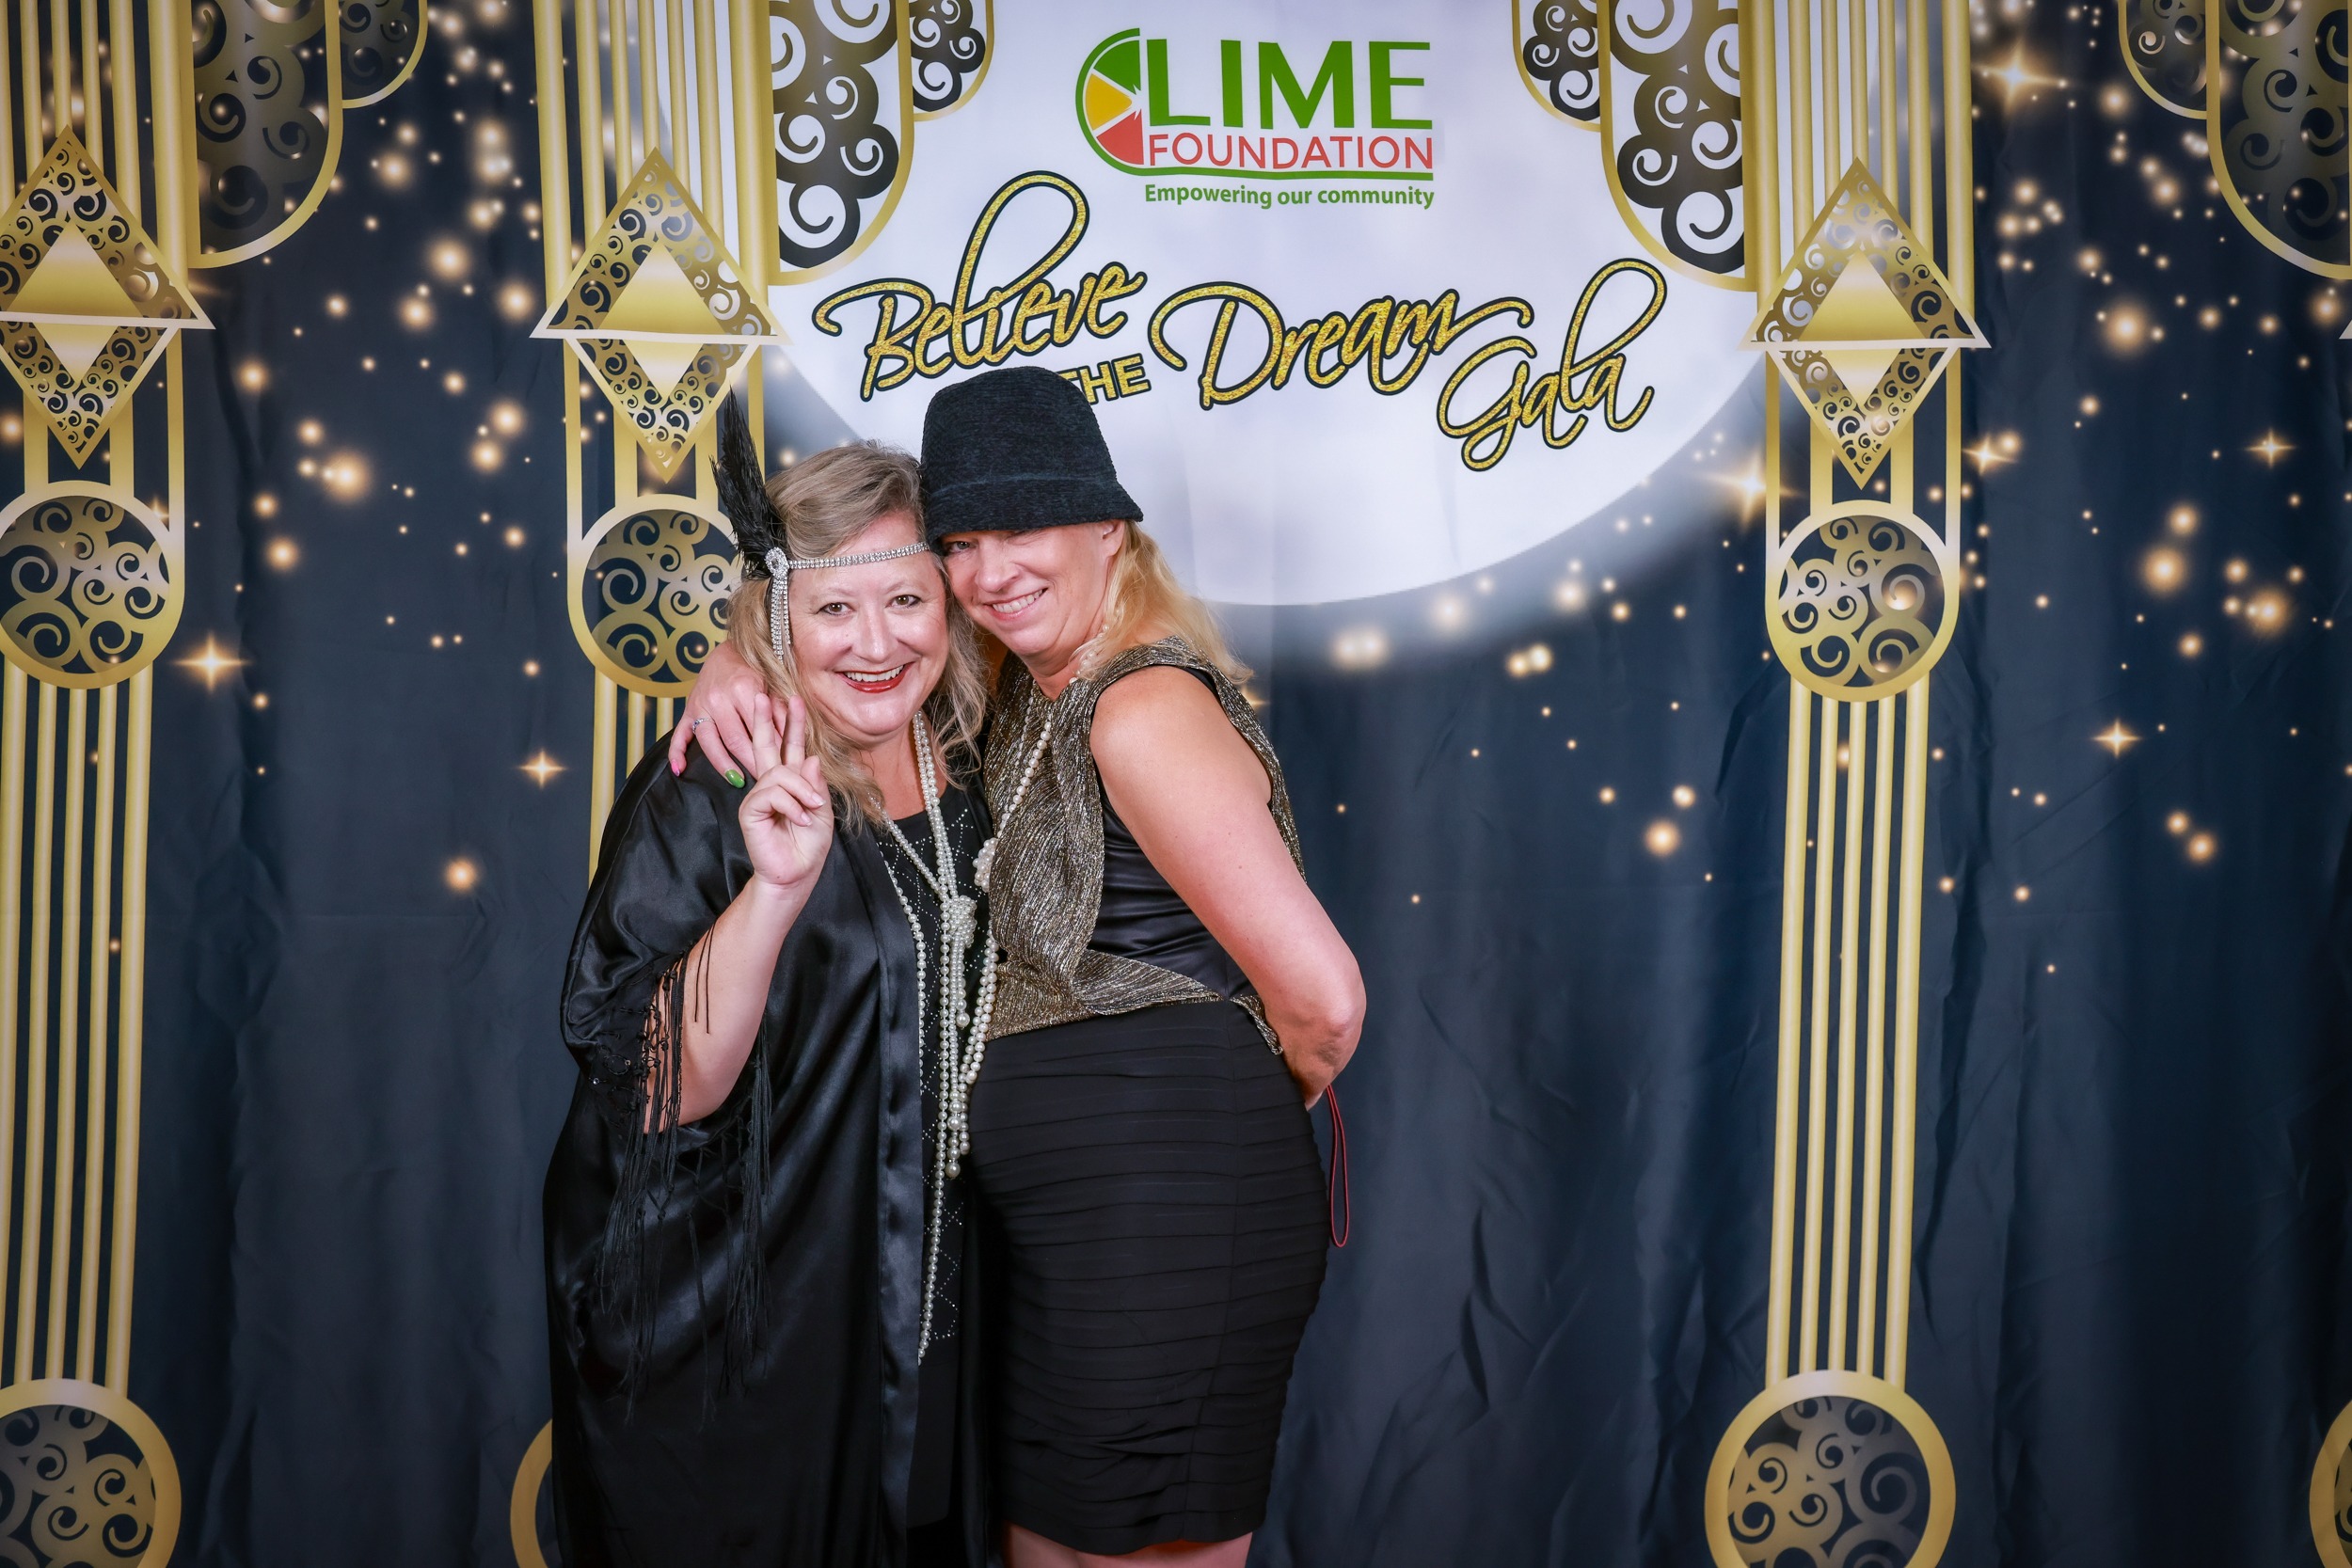 Two women posing for a photo in front of a backdrop at a Sonoma County non-profit organization event.